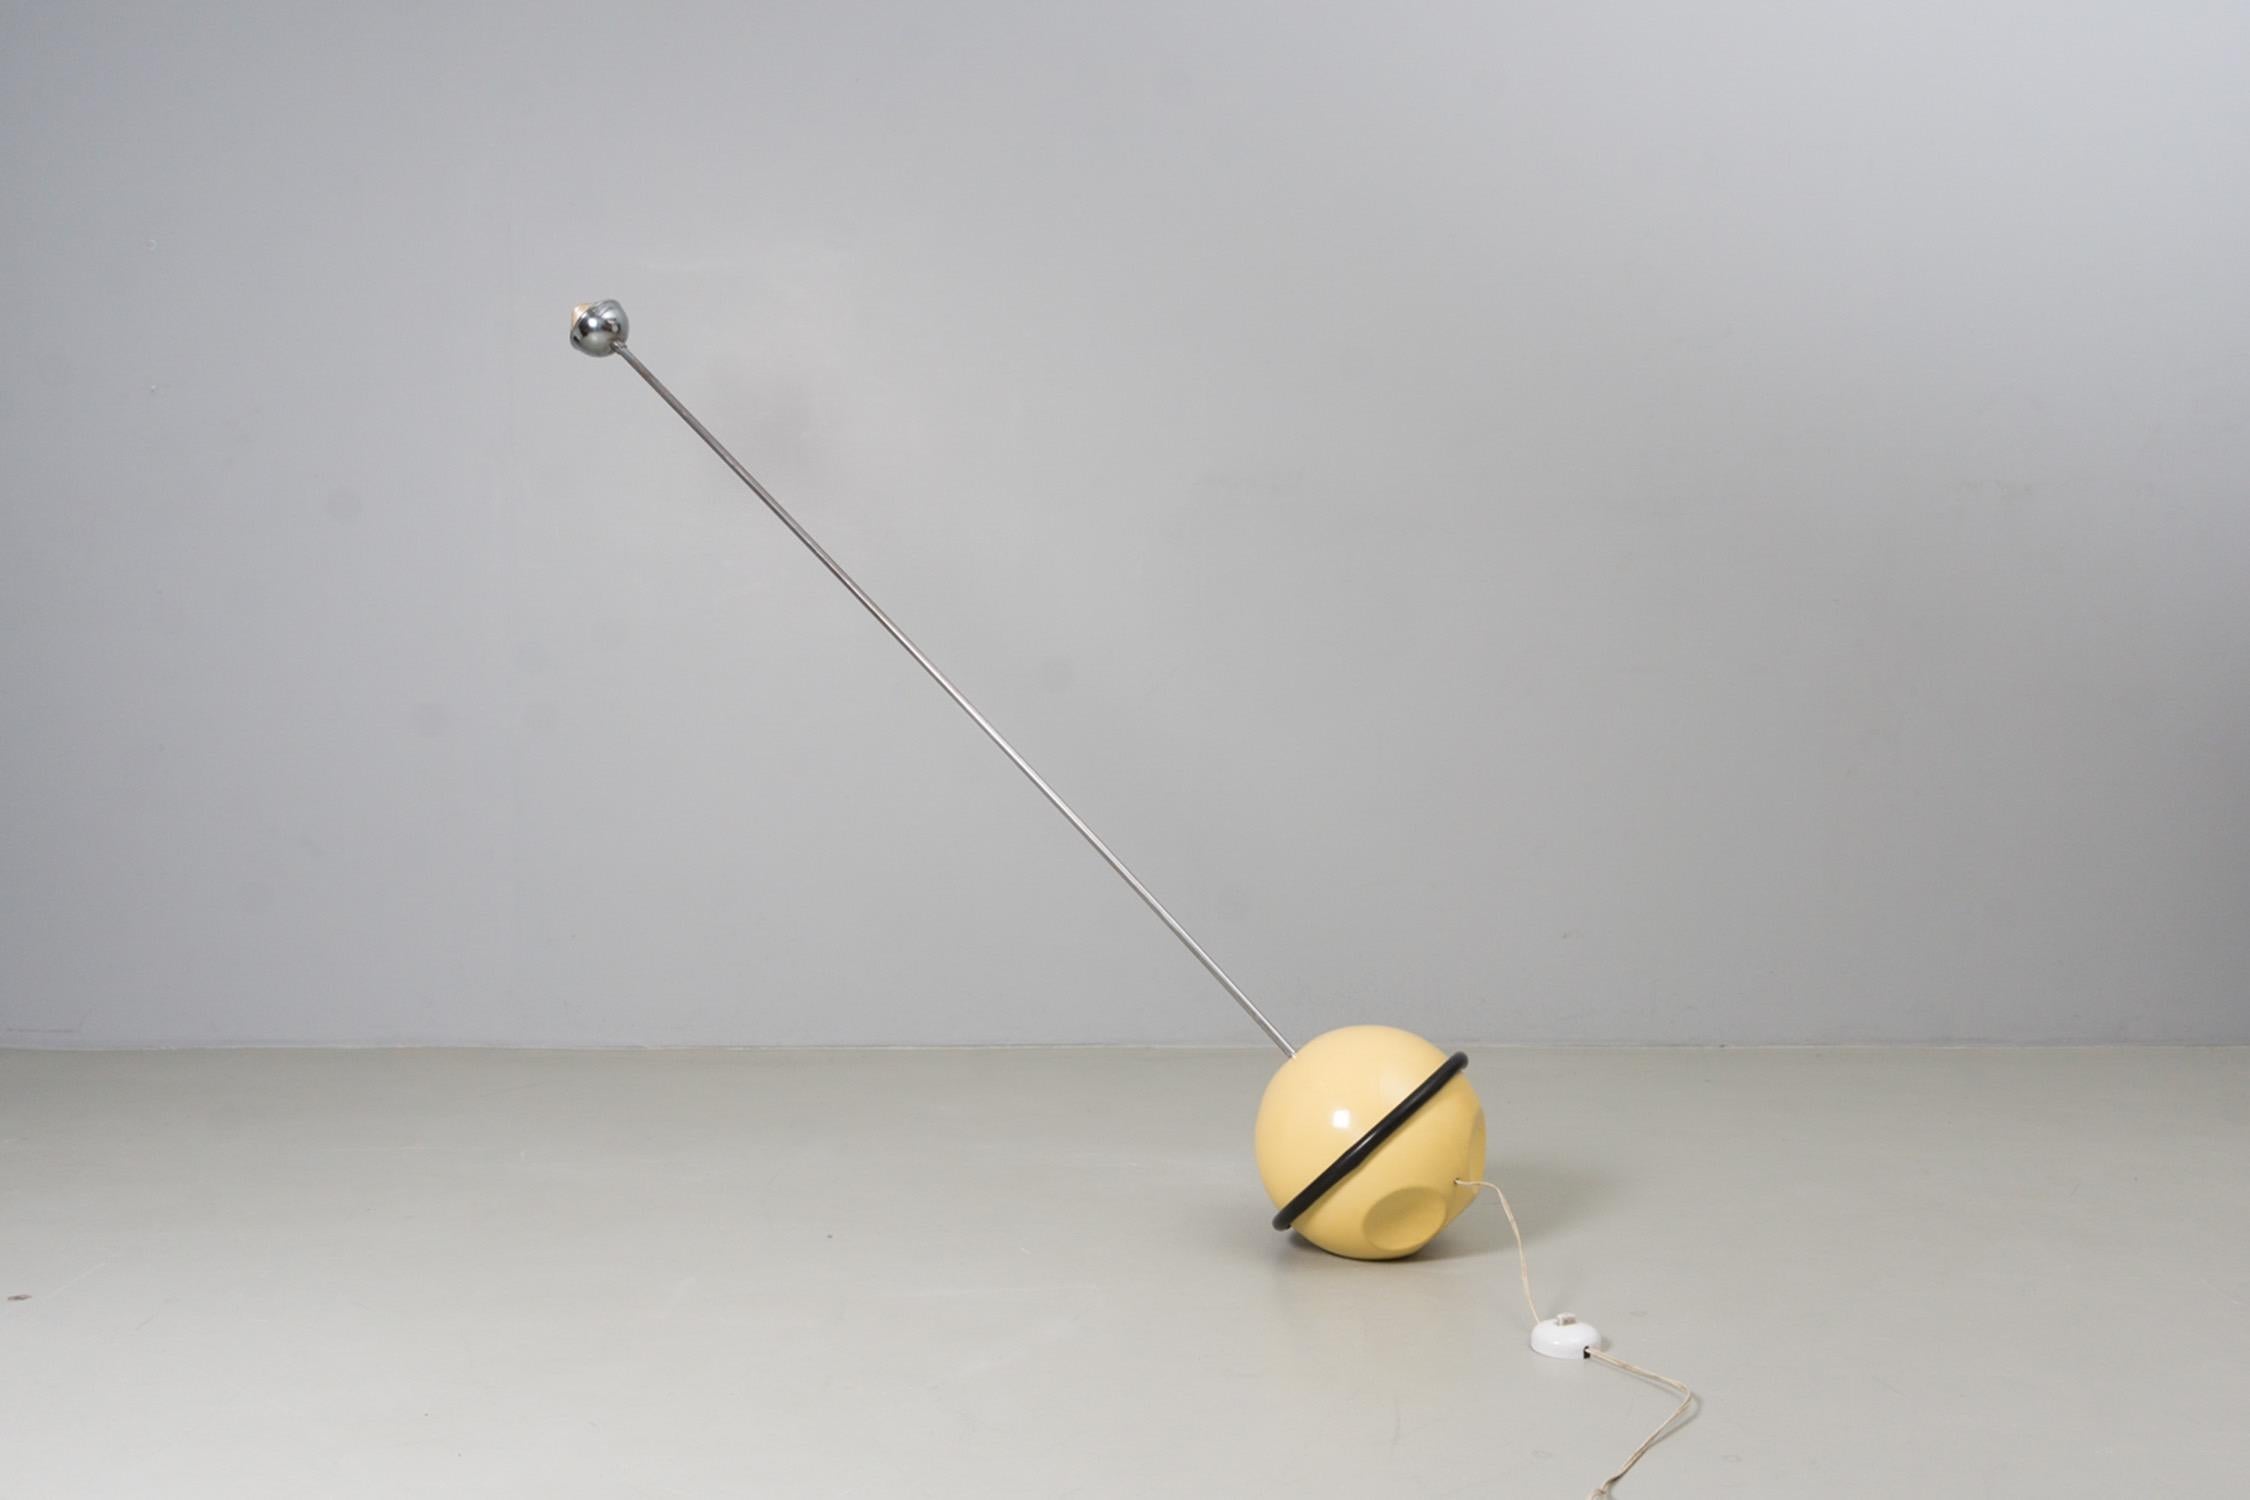 This eccentric light piece is made of chromed metal and polystyrene. Its playful spherical foot is easily adjusted in position, colored pale orangey yellow. The light source is 12-Volt-Halogen.
Made by Sormani, Italy.